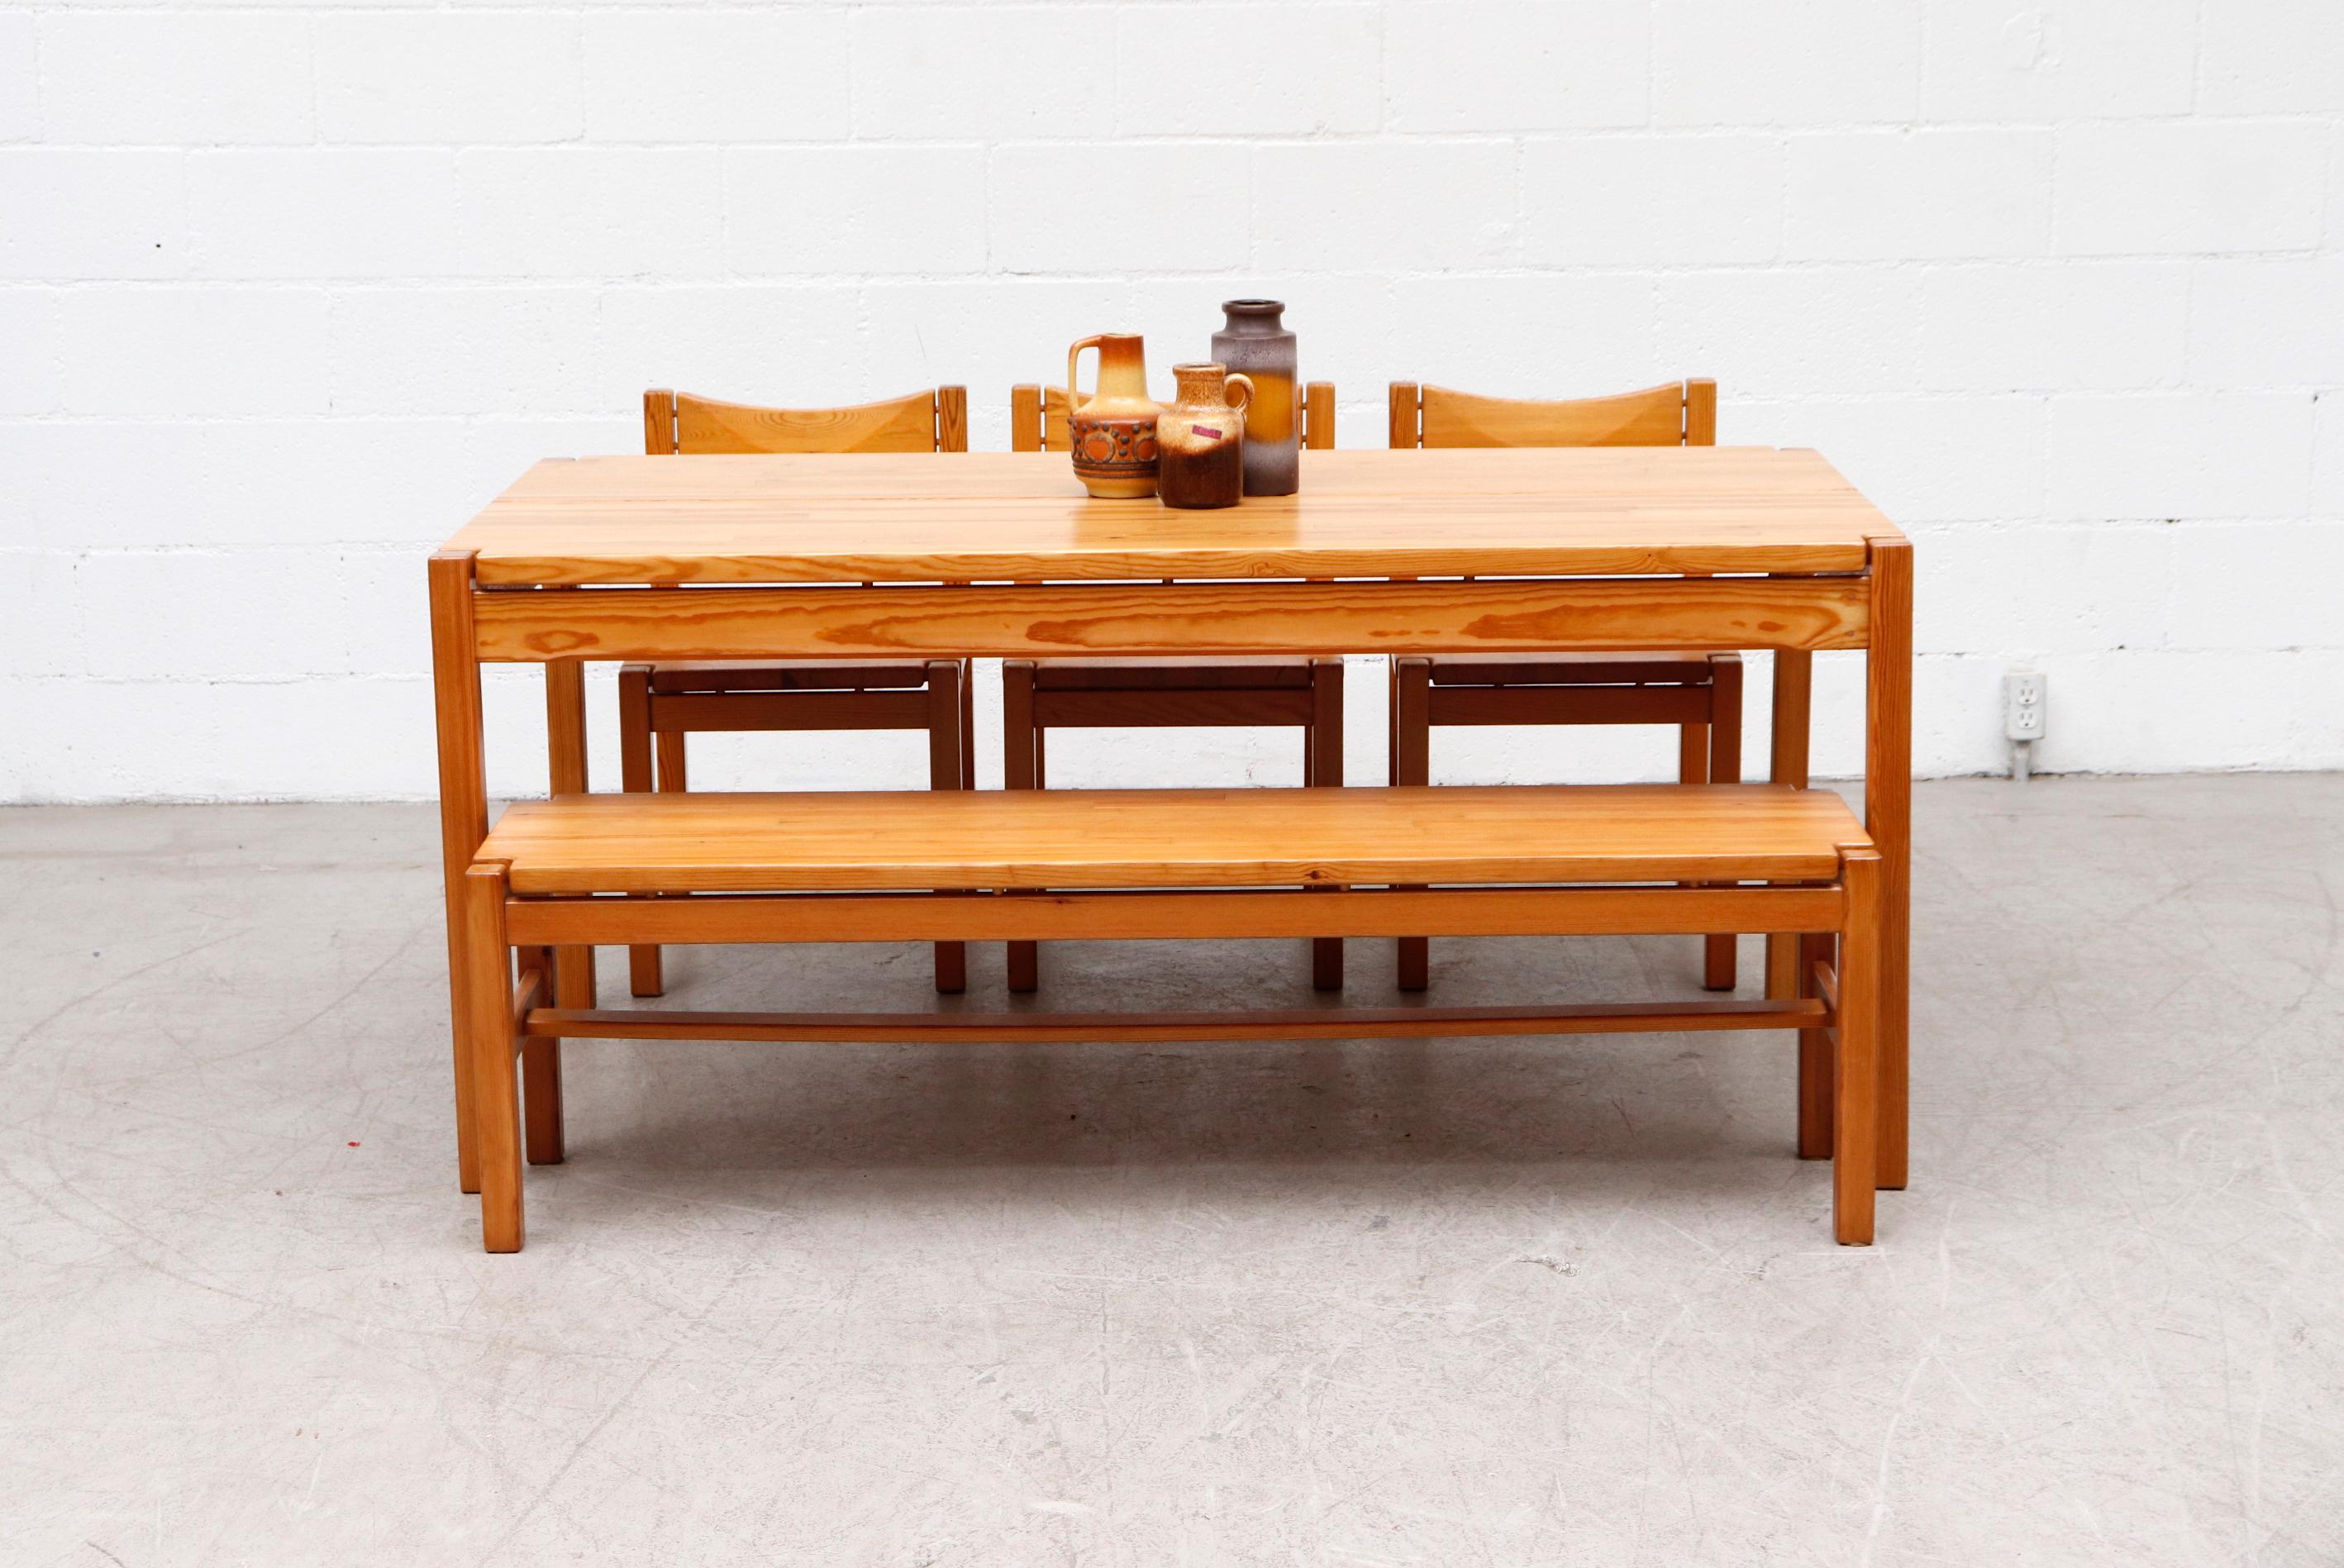 Midcentury Ilmari Tapiovaara dining set with pine table, 3 chairs and a matching bench. In Original condition with Visible Wear Consistent with its age and use. Bench measures 58.25 x 14.75 x 16.75 and the chairs measure 17.25 x 17 x 17/29.5. Set